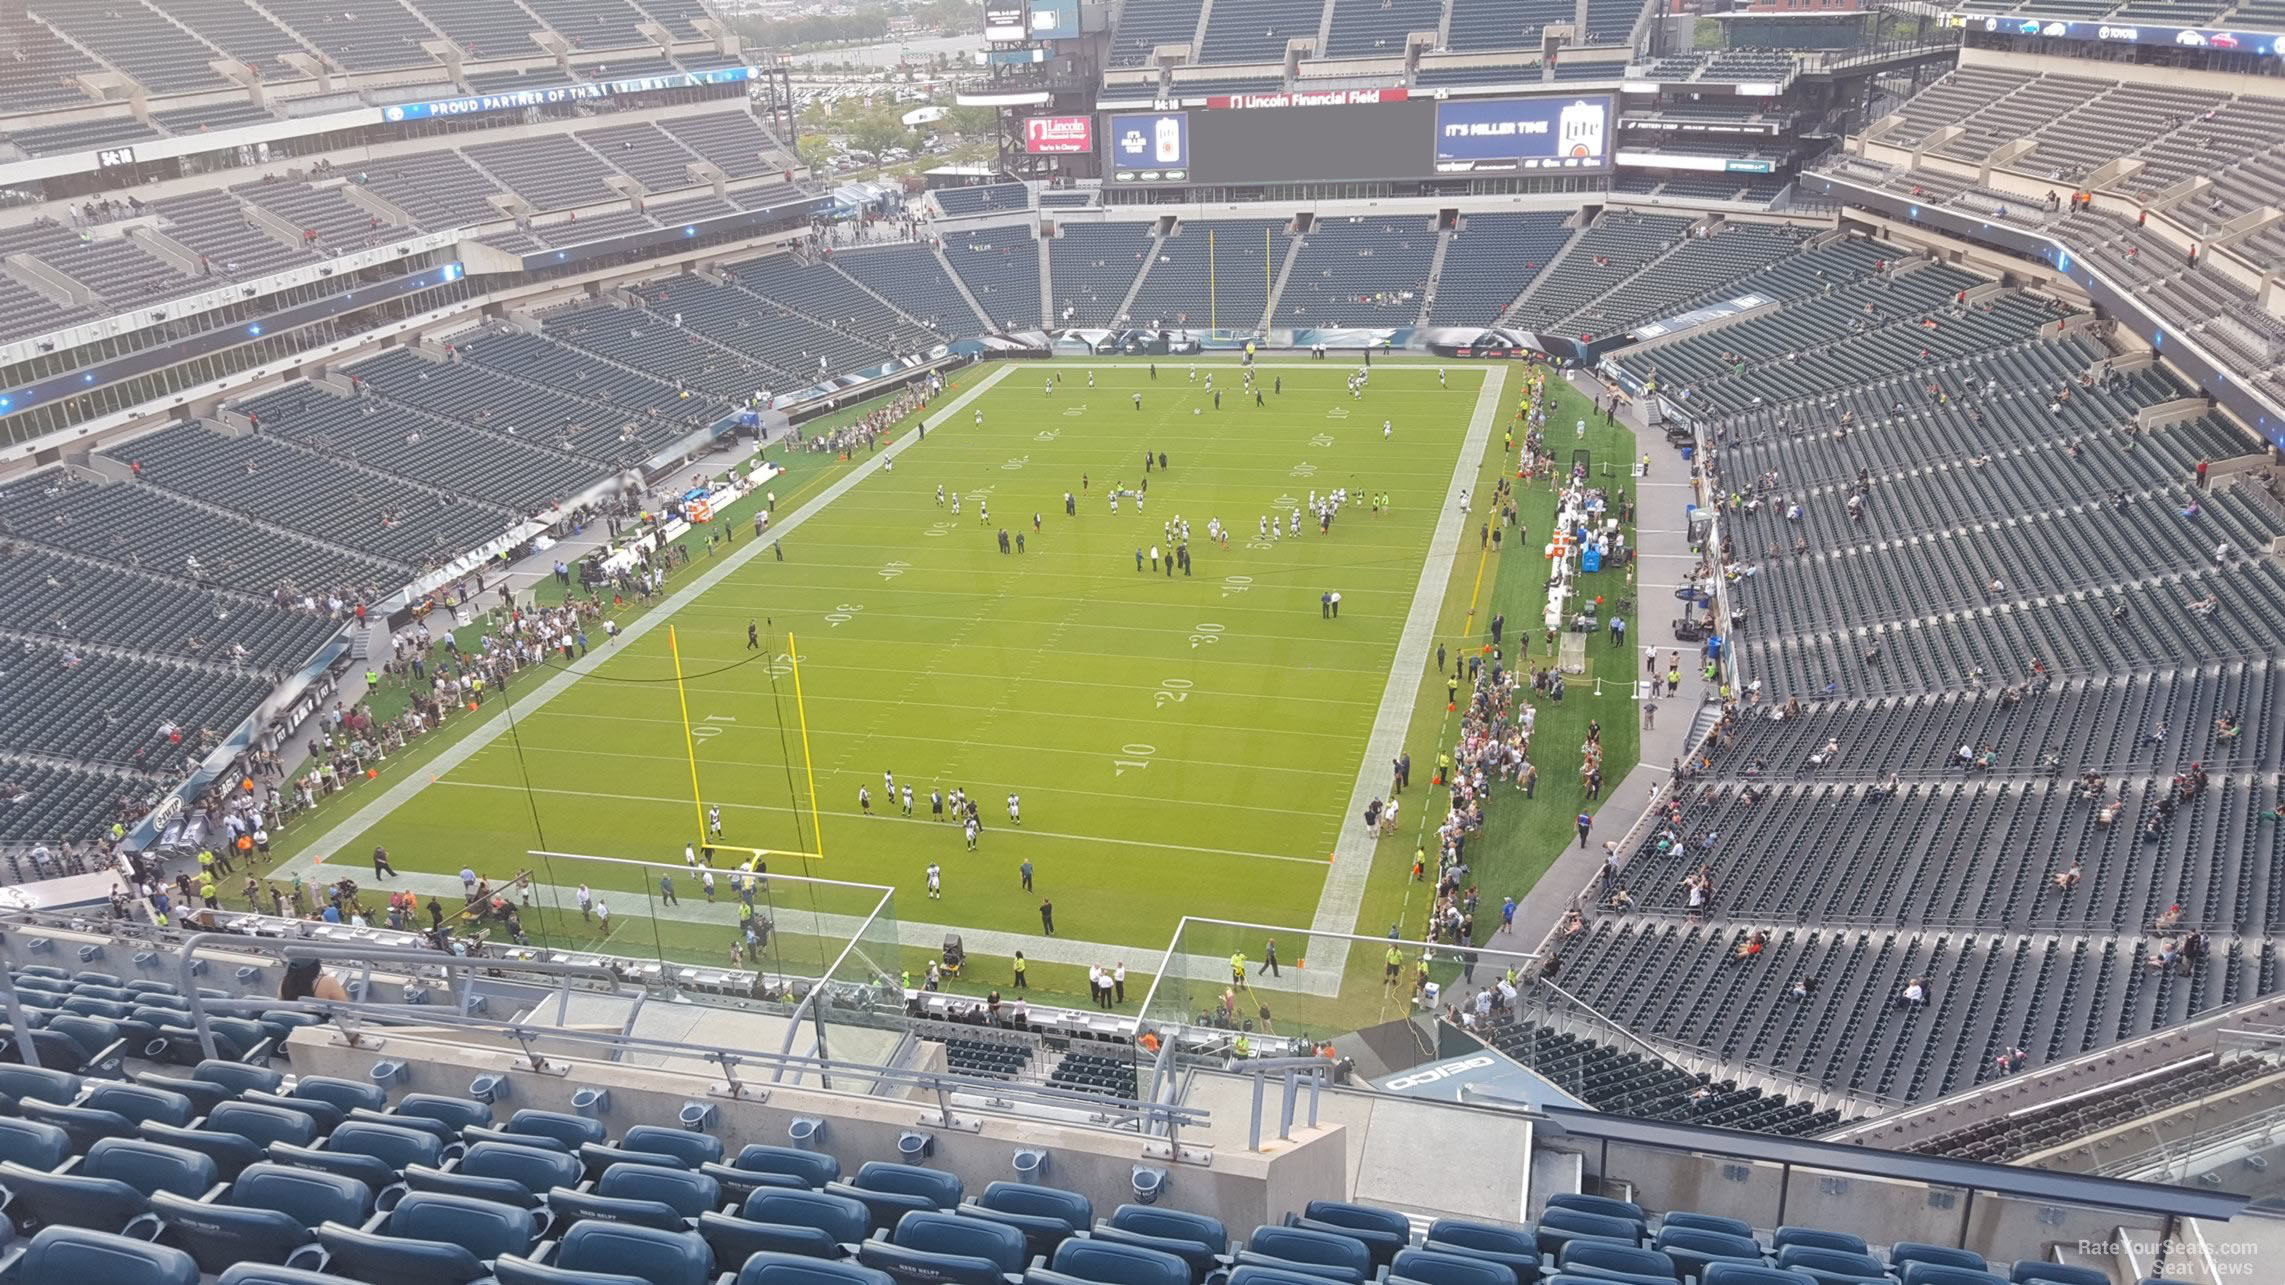 section 215, row 15 seat view  for football - lincoln financial field